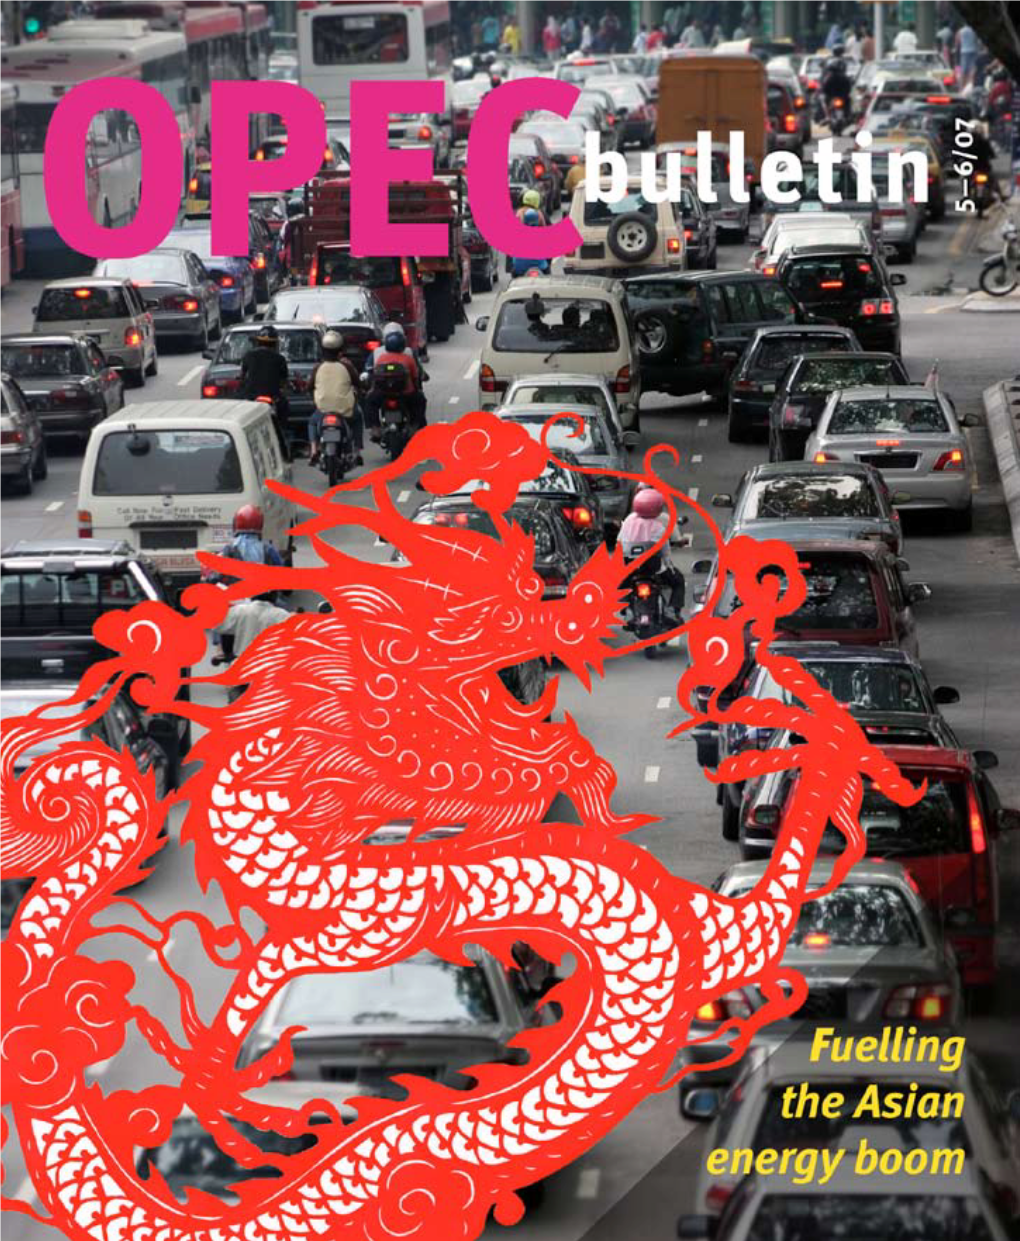 May-June 2007 Edition of the OPEC Bulletin